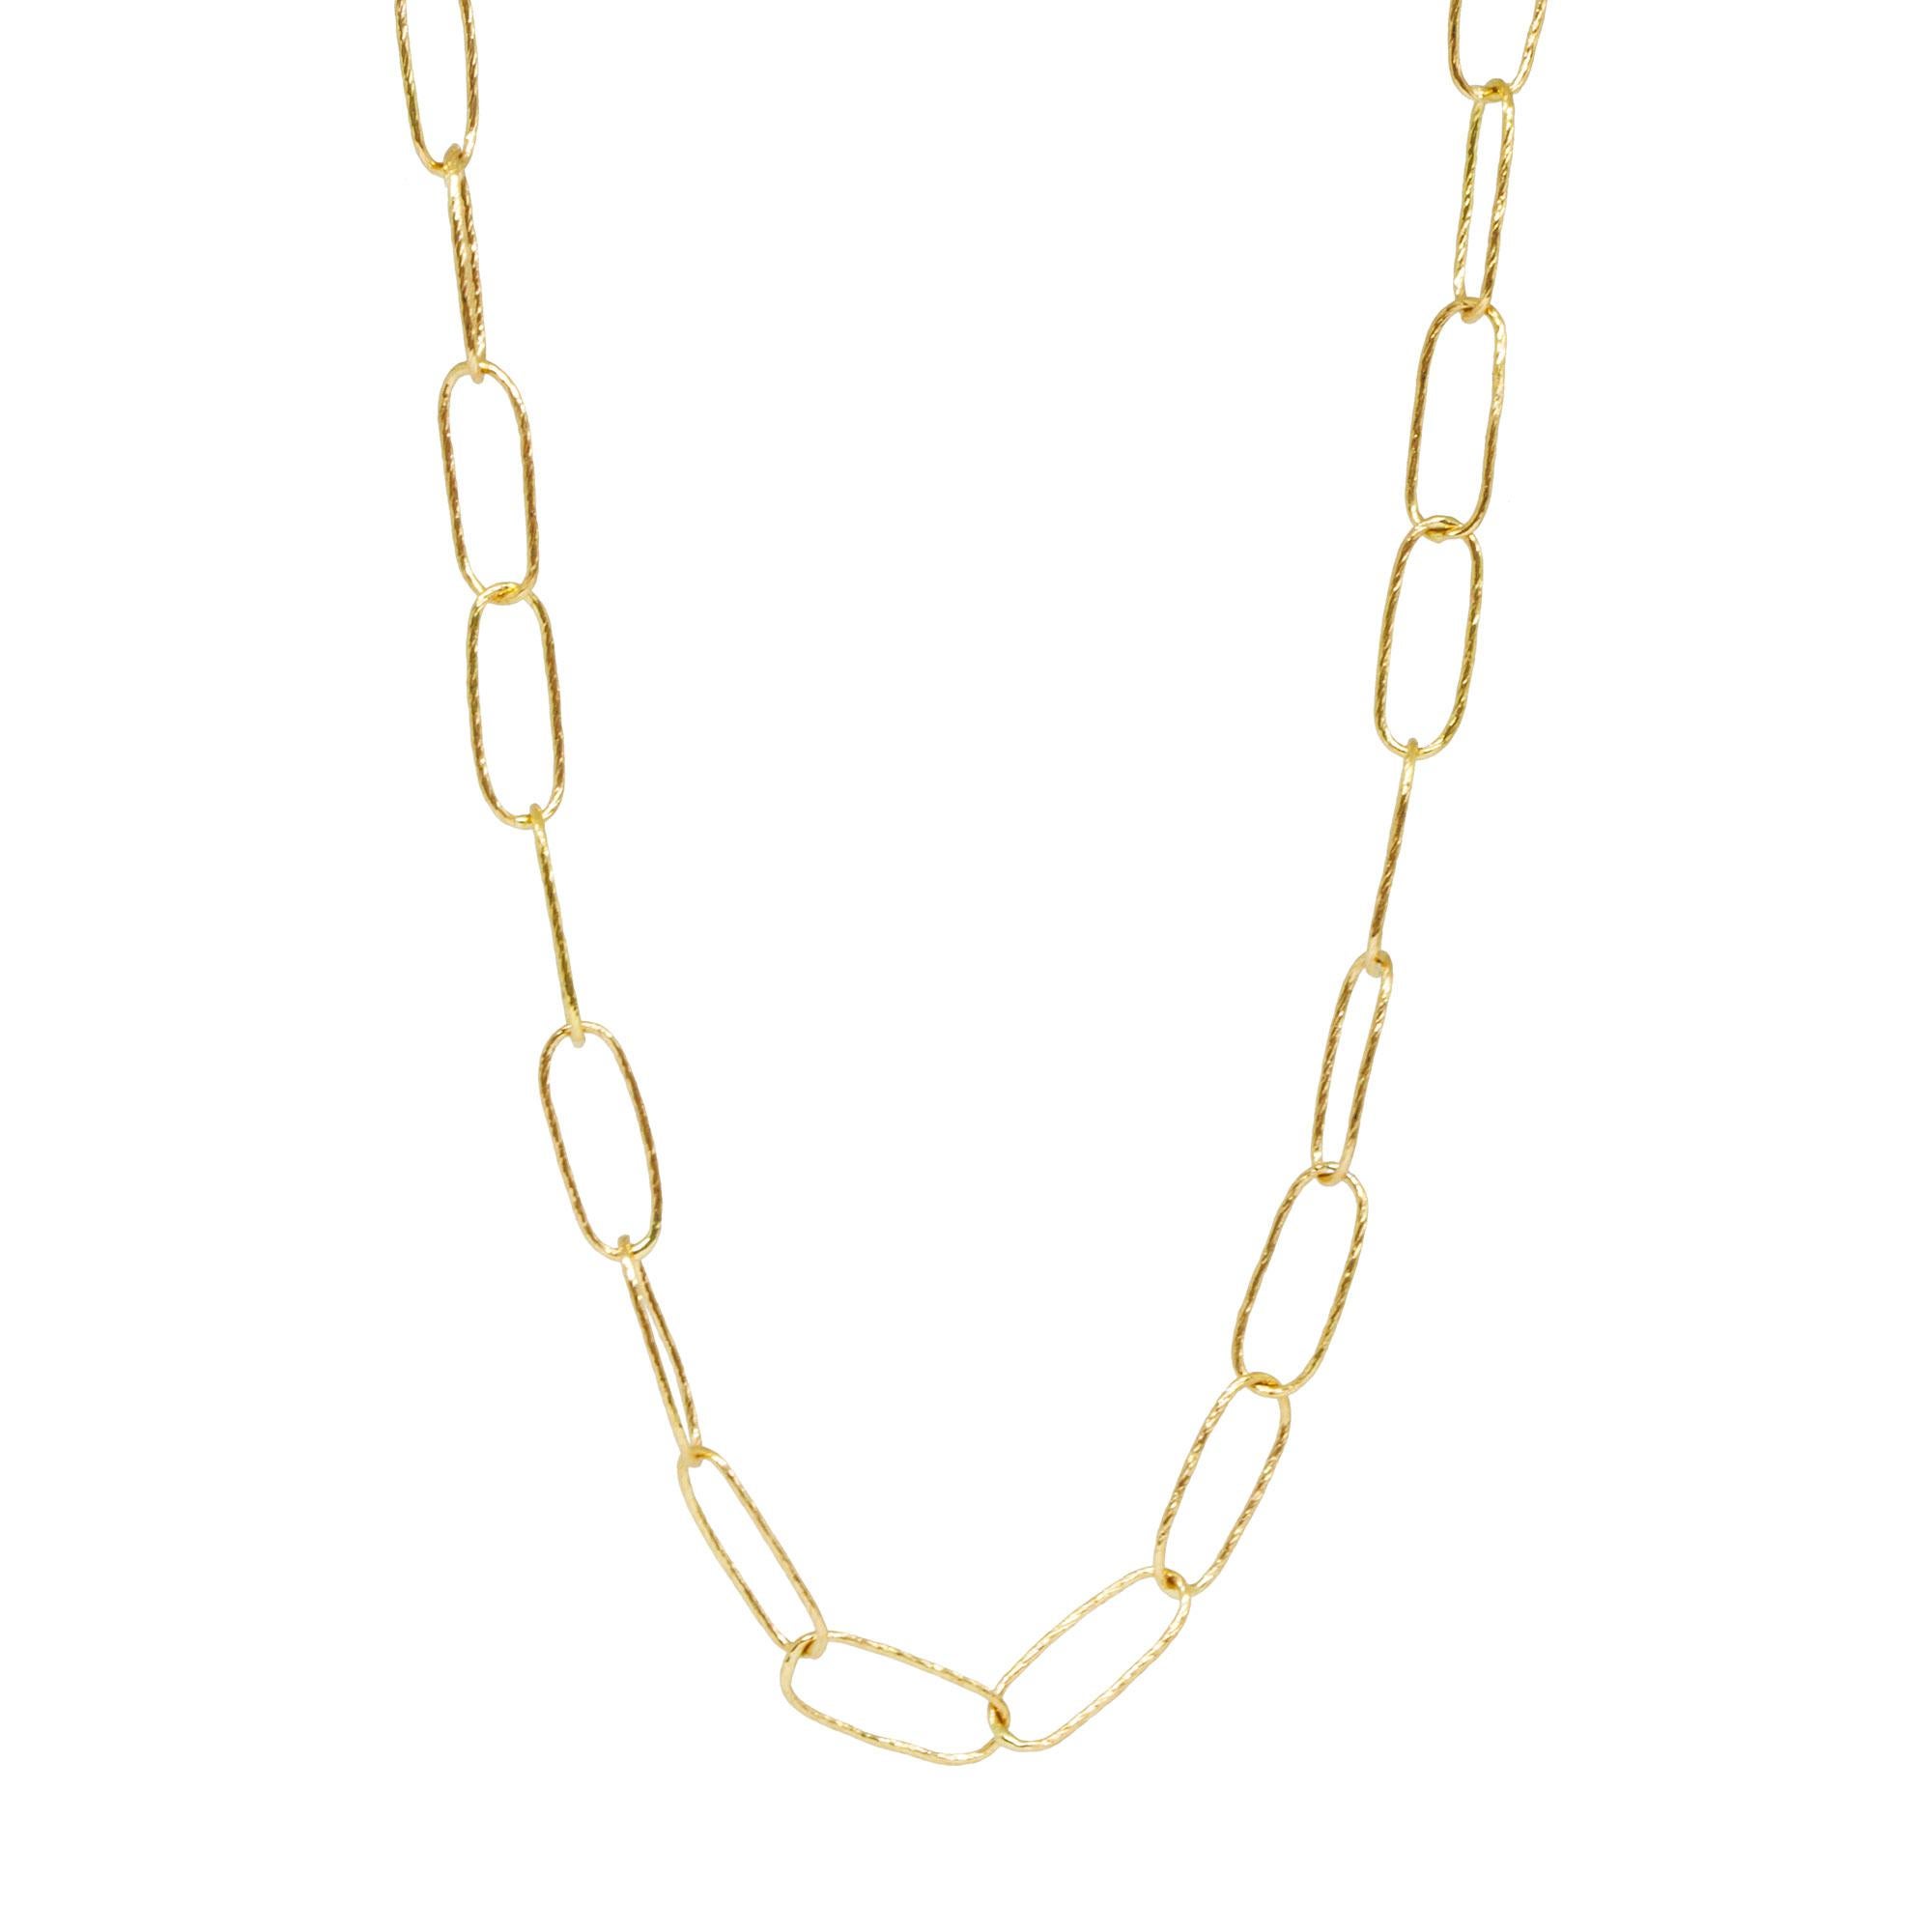 
Metal: 18K Yellow Gold
Length: 28''
Link size: 12x3.5mm

The Maker:
Our jewelry is designed in Denver, CO and ethically made by our skilled jewelers in our studio in Vietnam.
